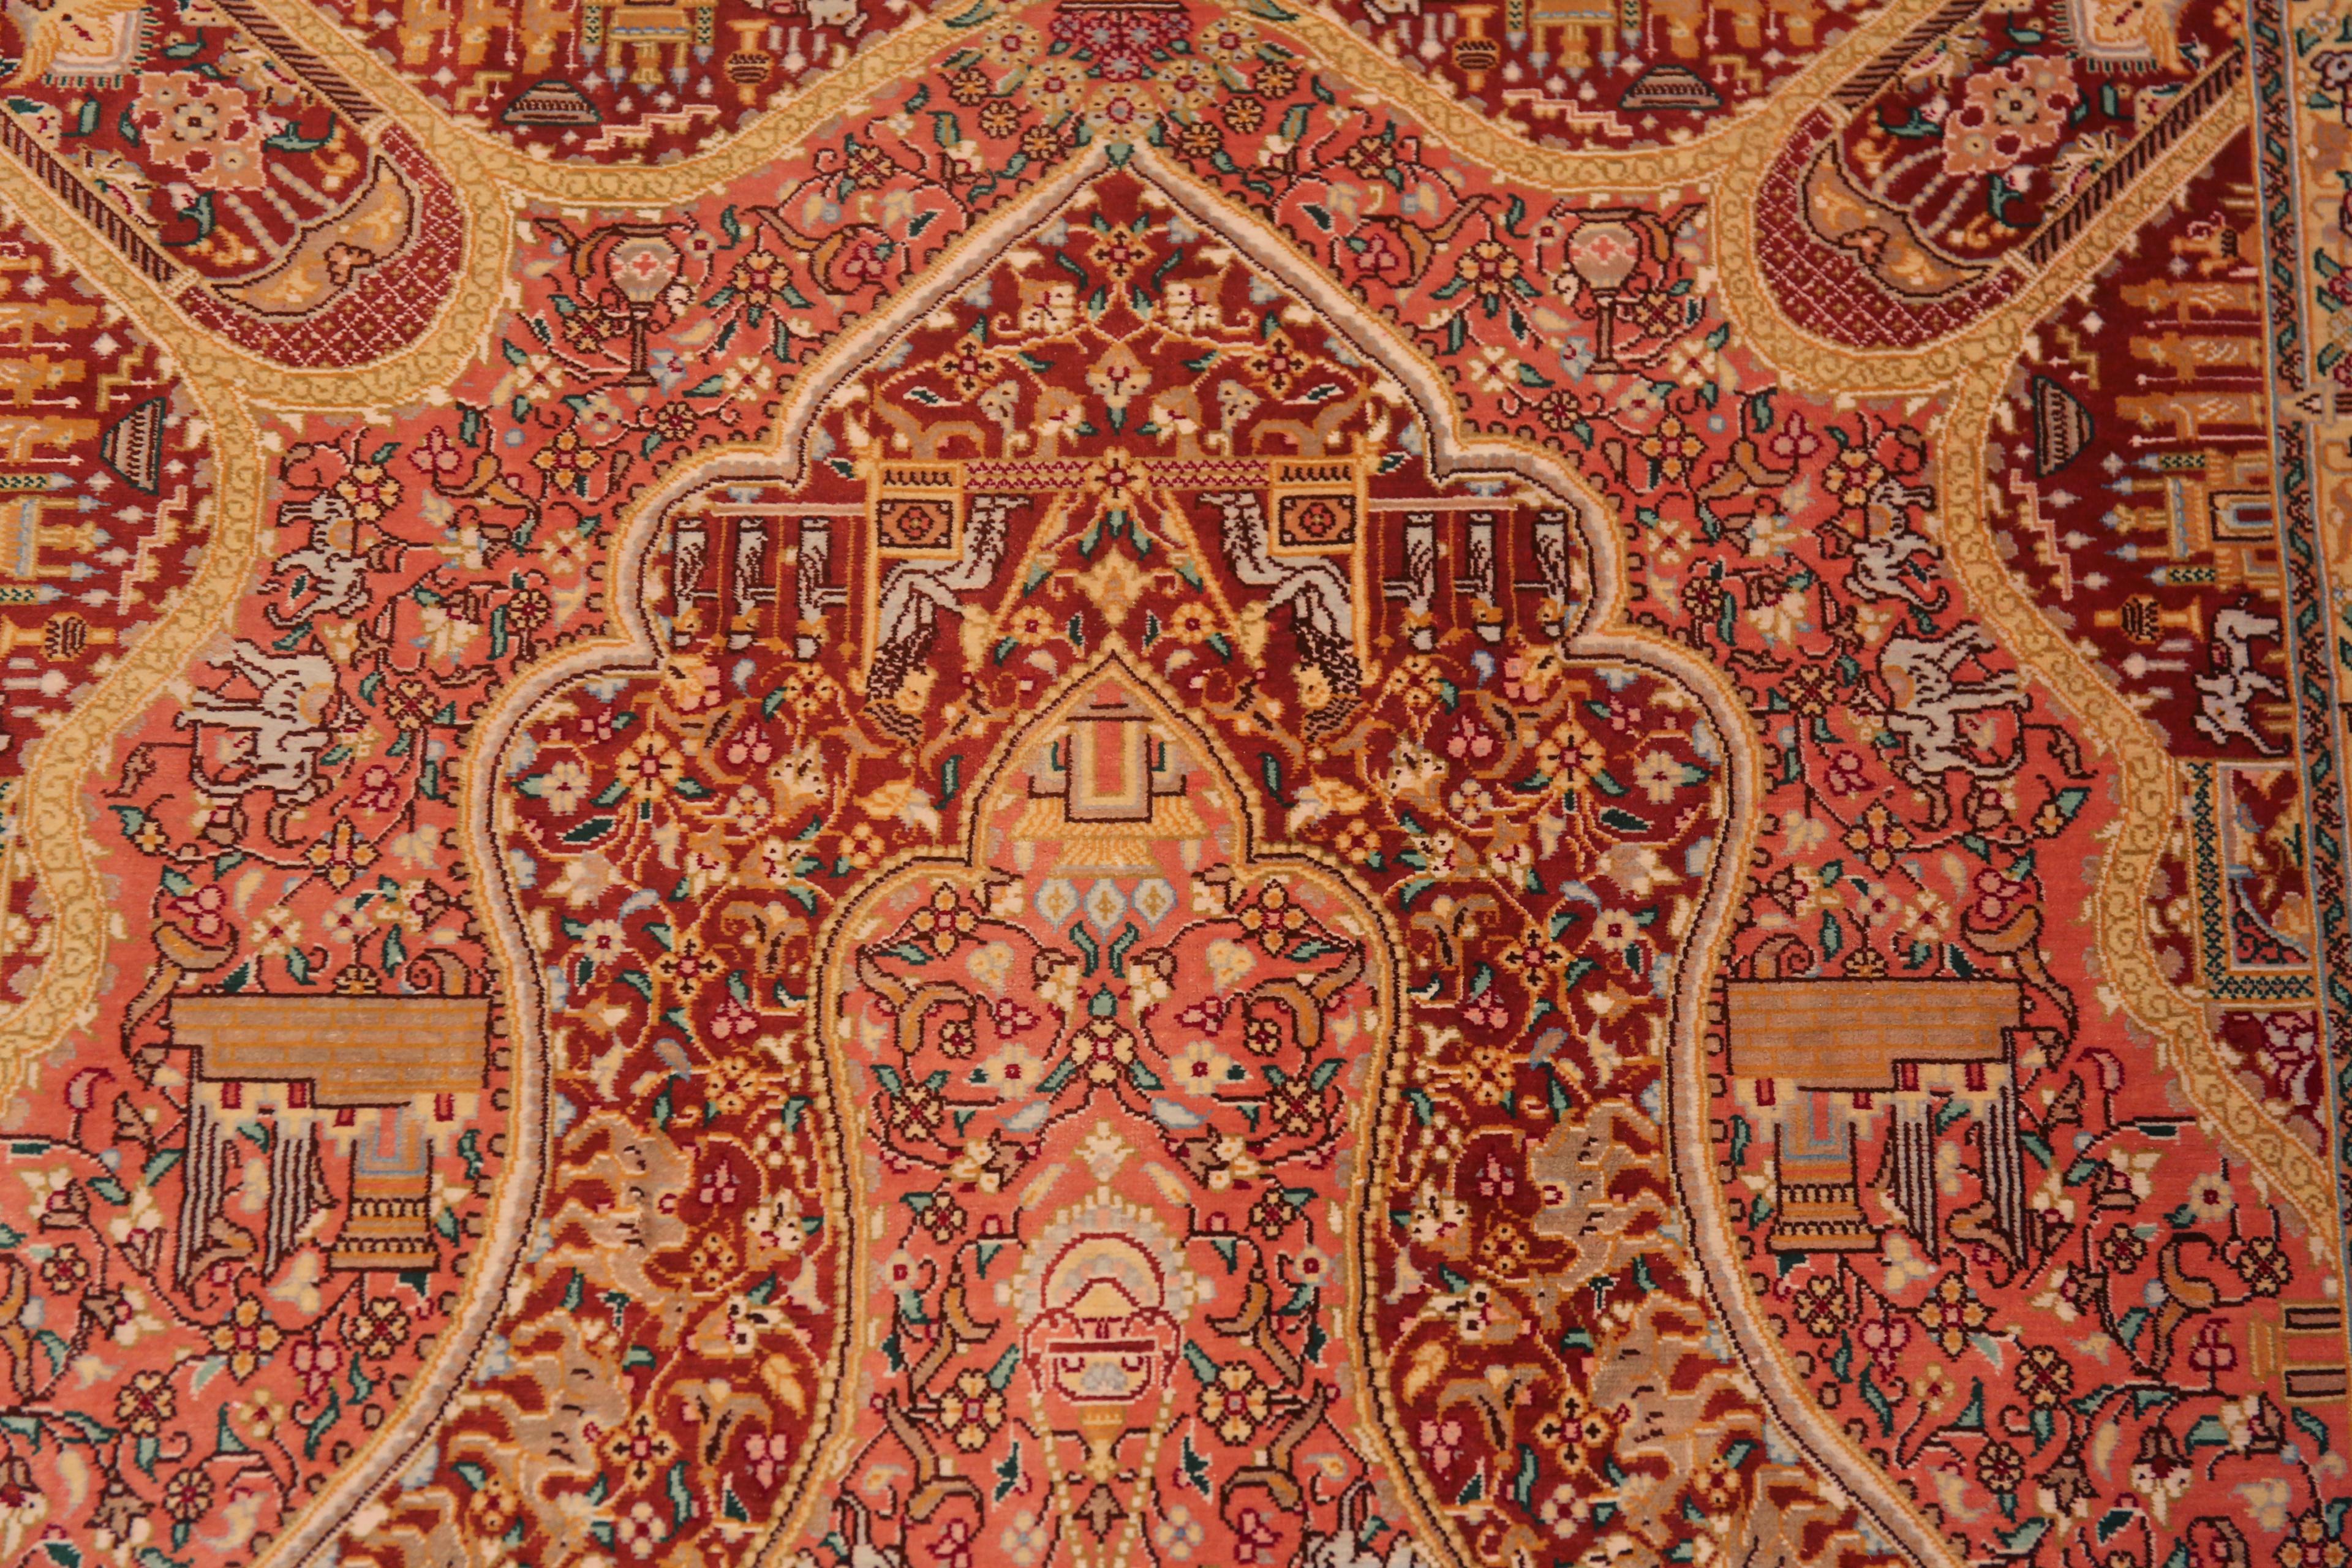 Extremely Impressive Small Fine Artistic Luxurious Silk Pile Vintage Persian Animal Design Qum Rug, country of origin: Persian Rugs, Circa date: Vintage